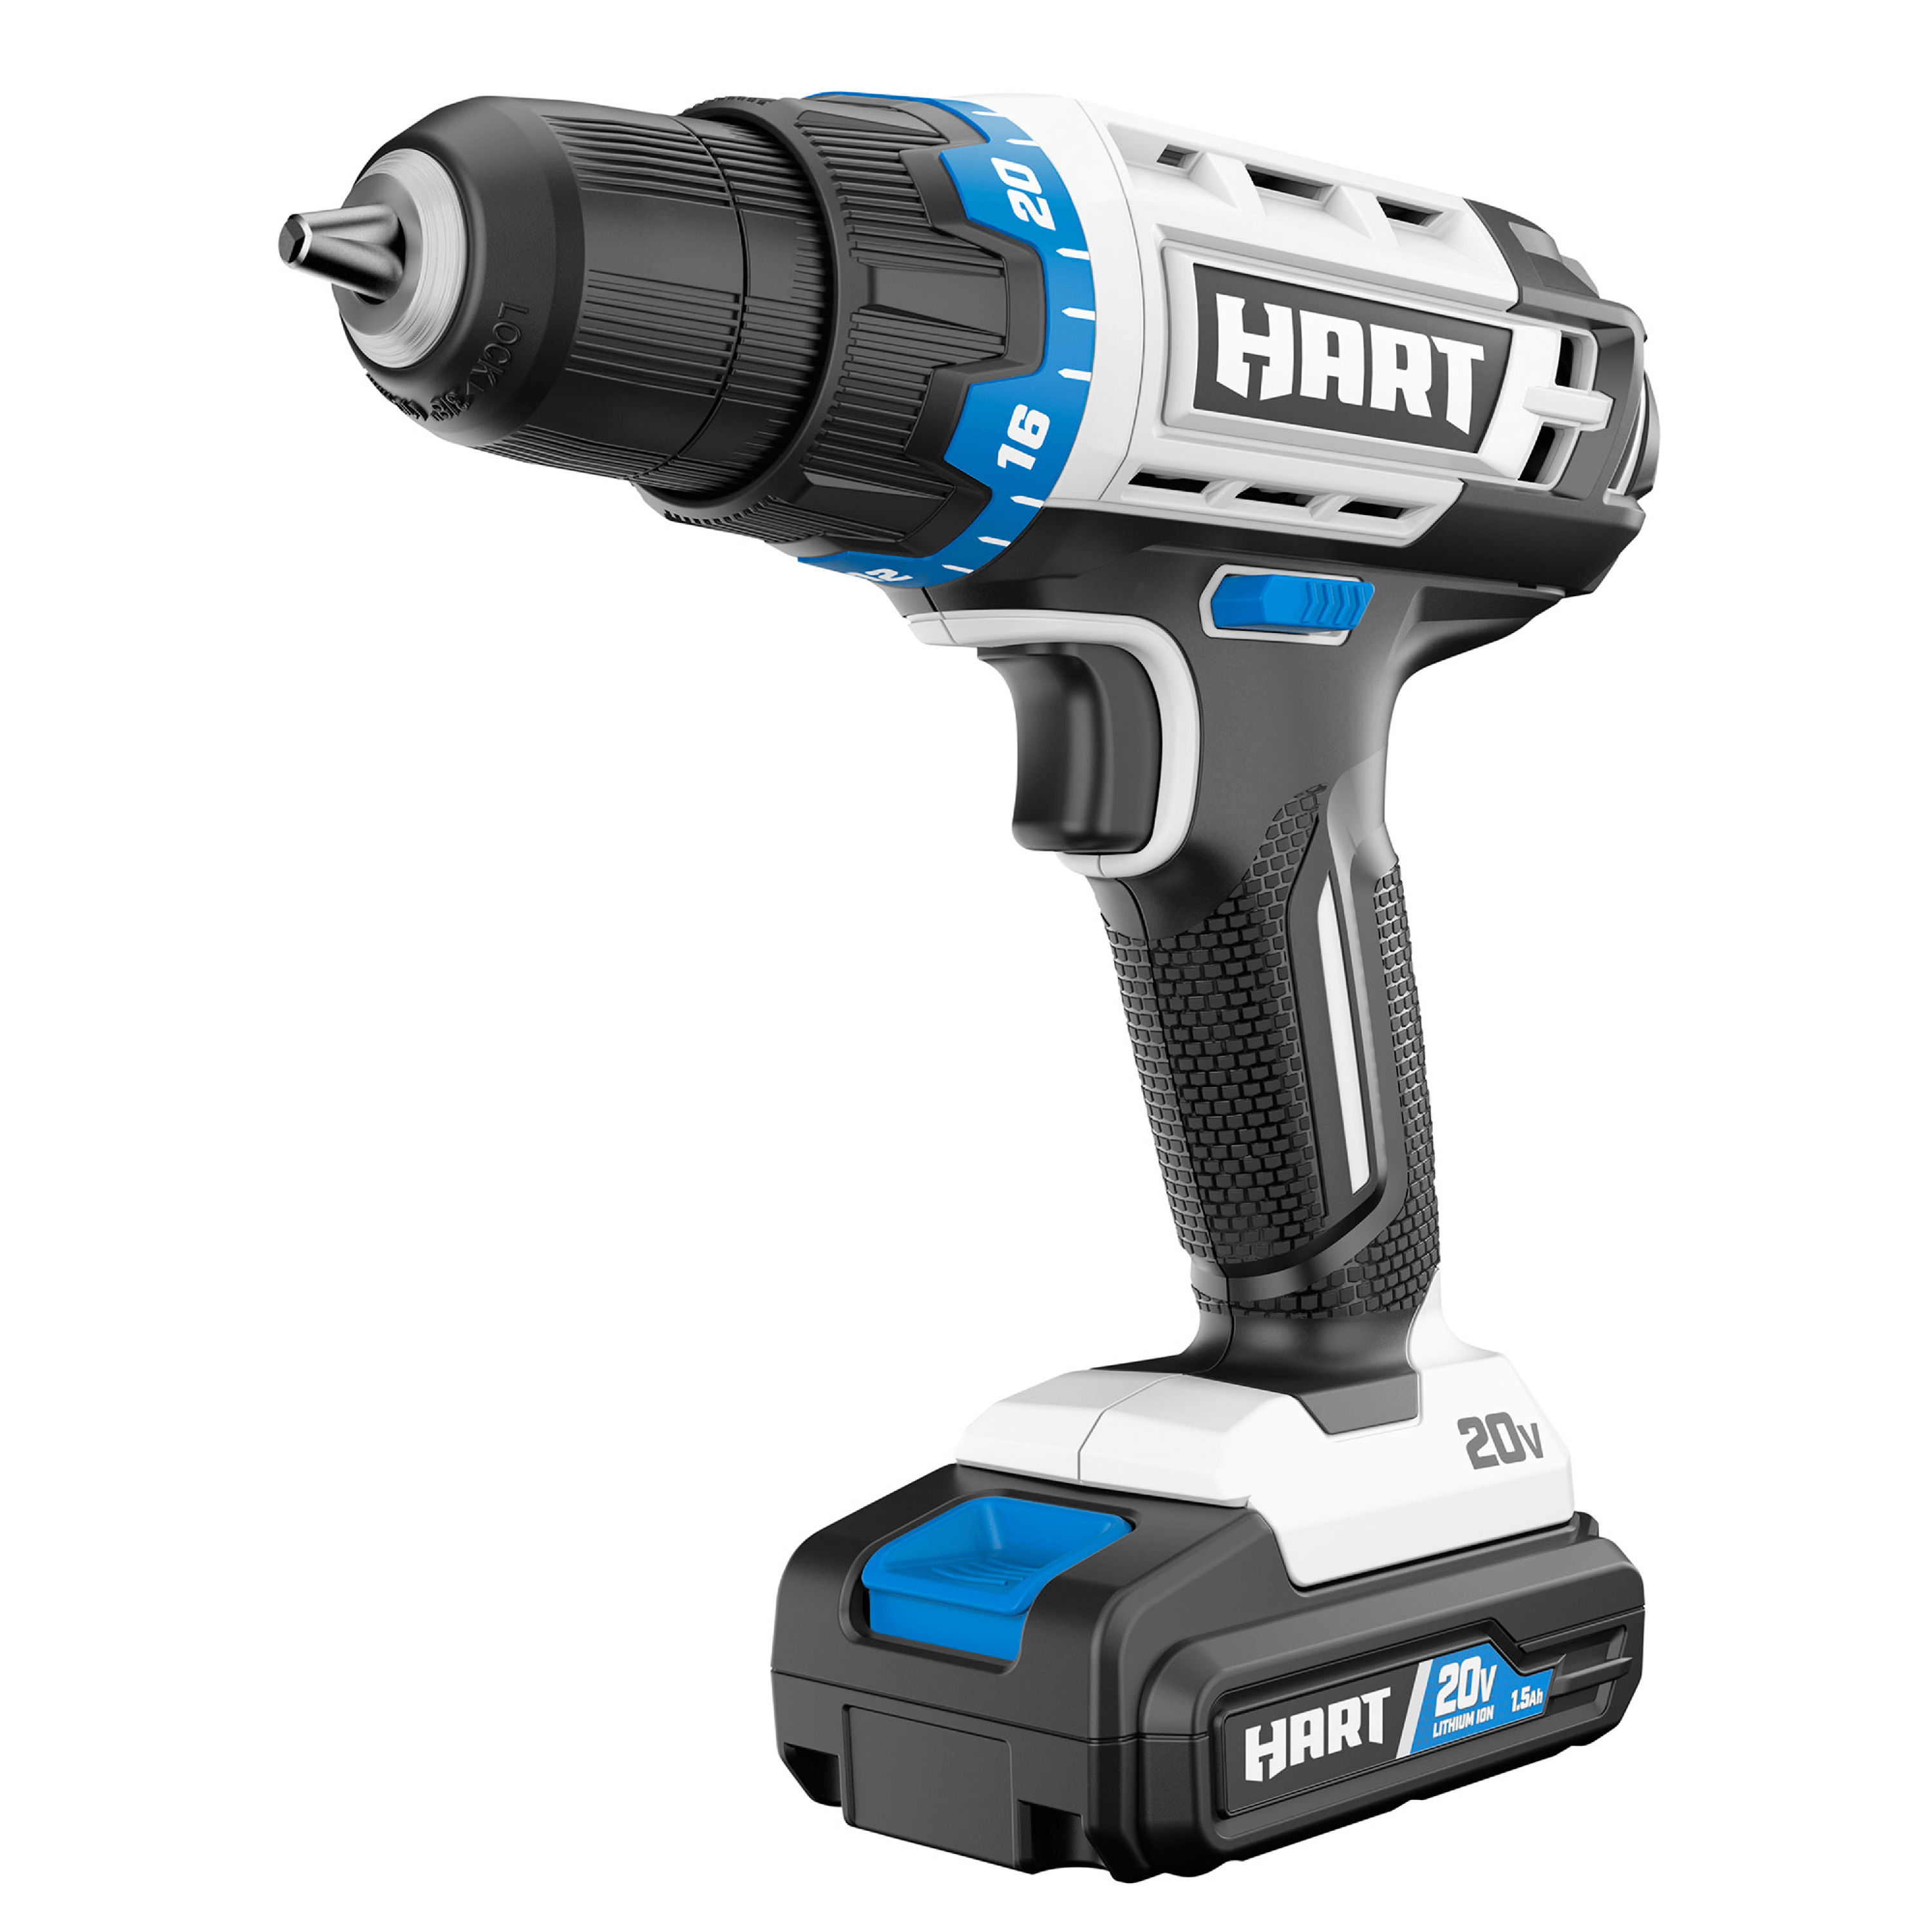 HART 20-Volt 3/8-inch Battery-Powered Drill/Driver Kit, (1) 1.5Ah Lithium-Ion Battery - image 1 of 8